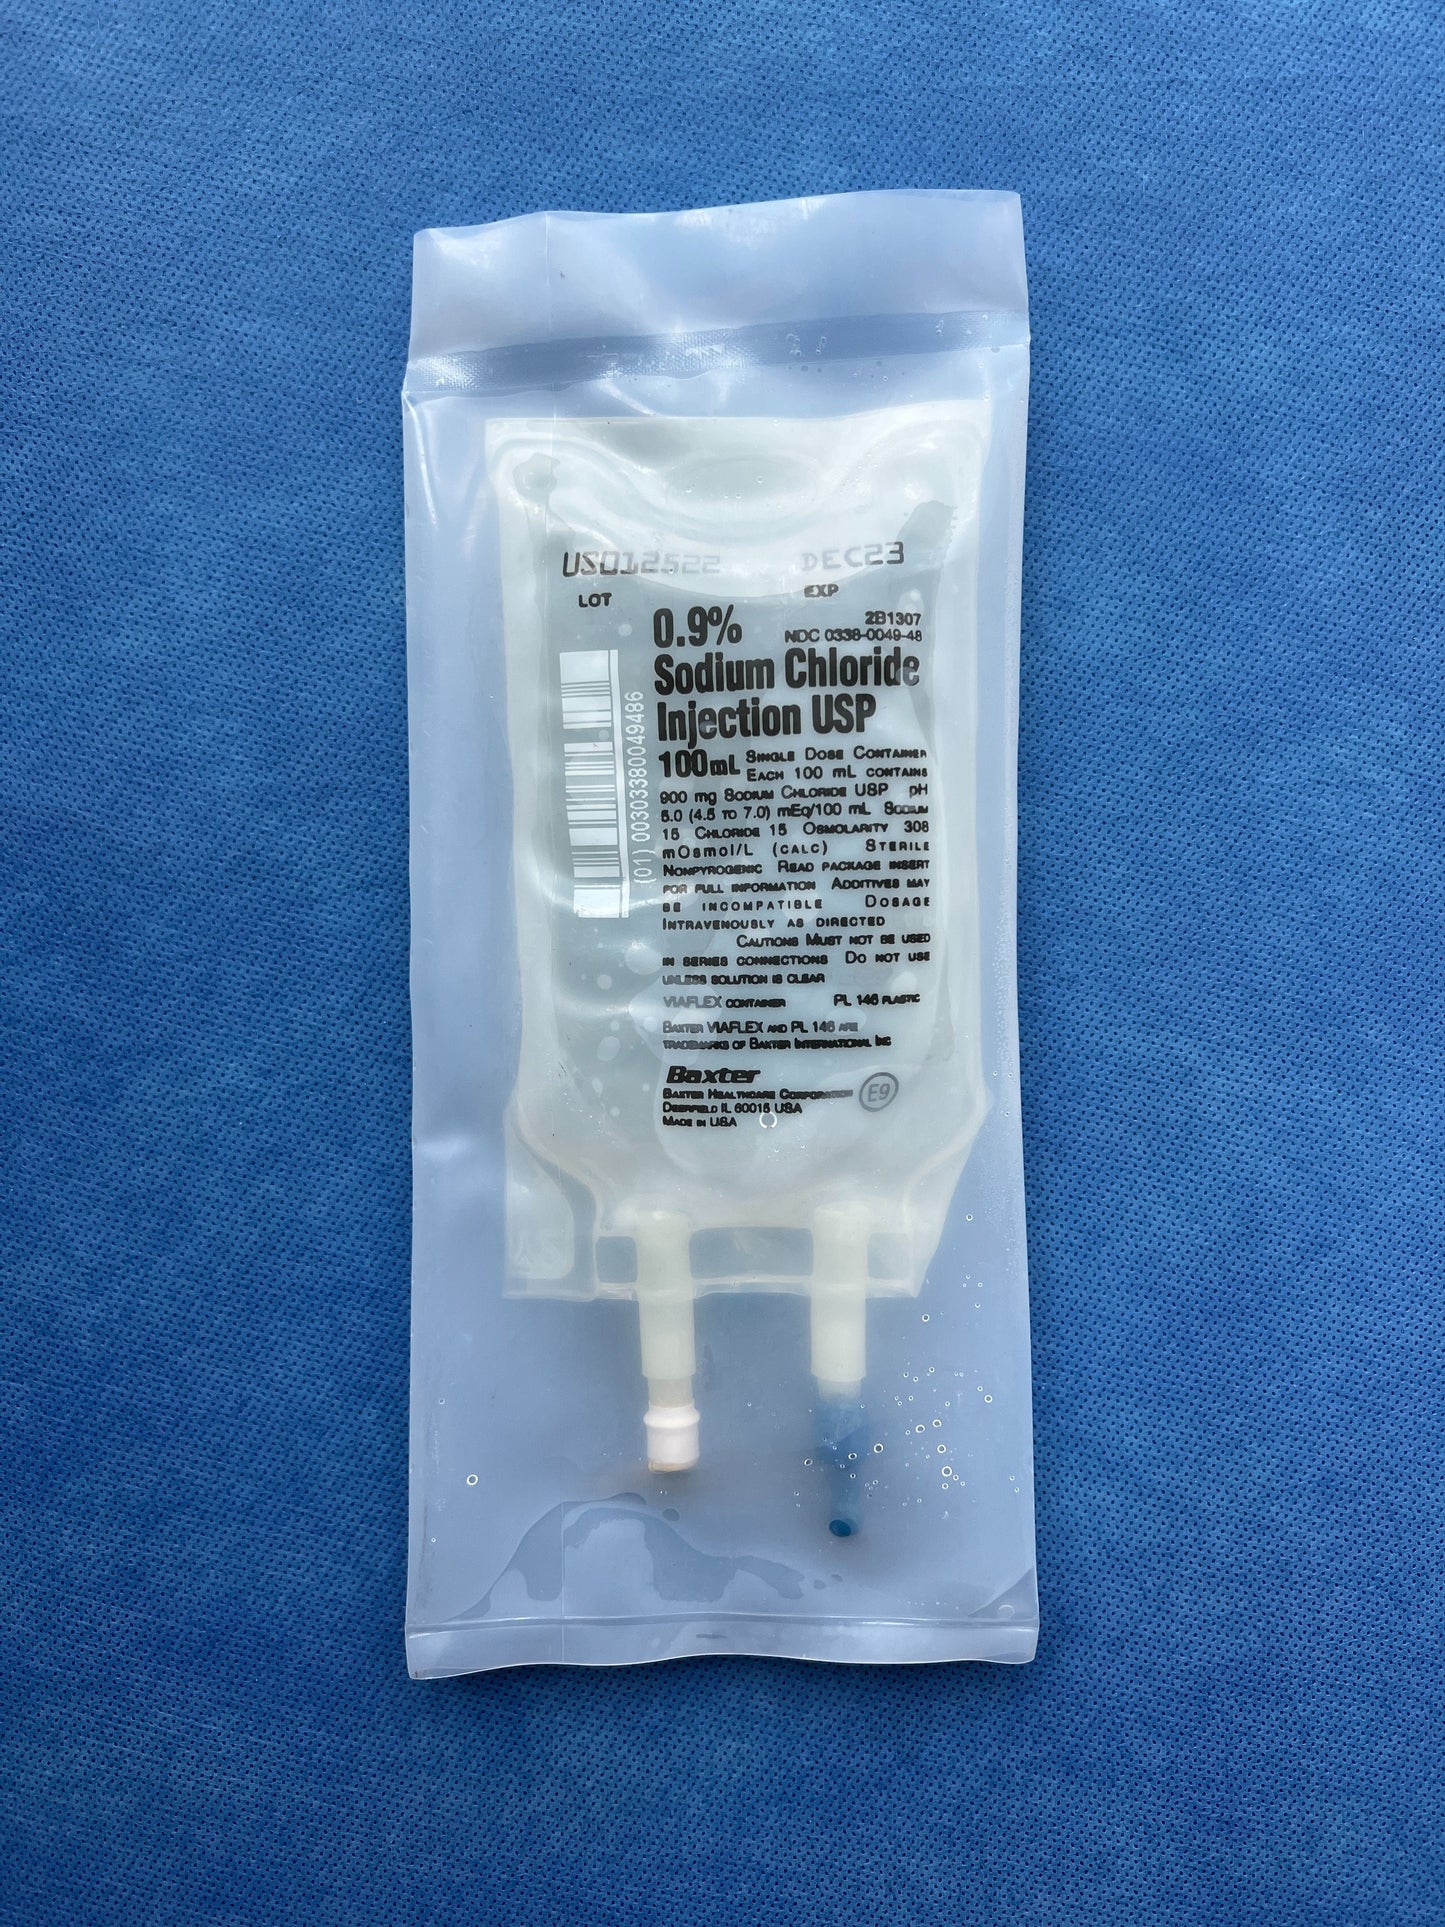 No Rx Required - IV Fluid Bag 0.9% Sodium Chloride (Normal Saline) 100mL